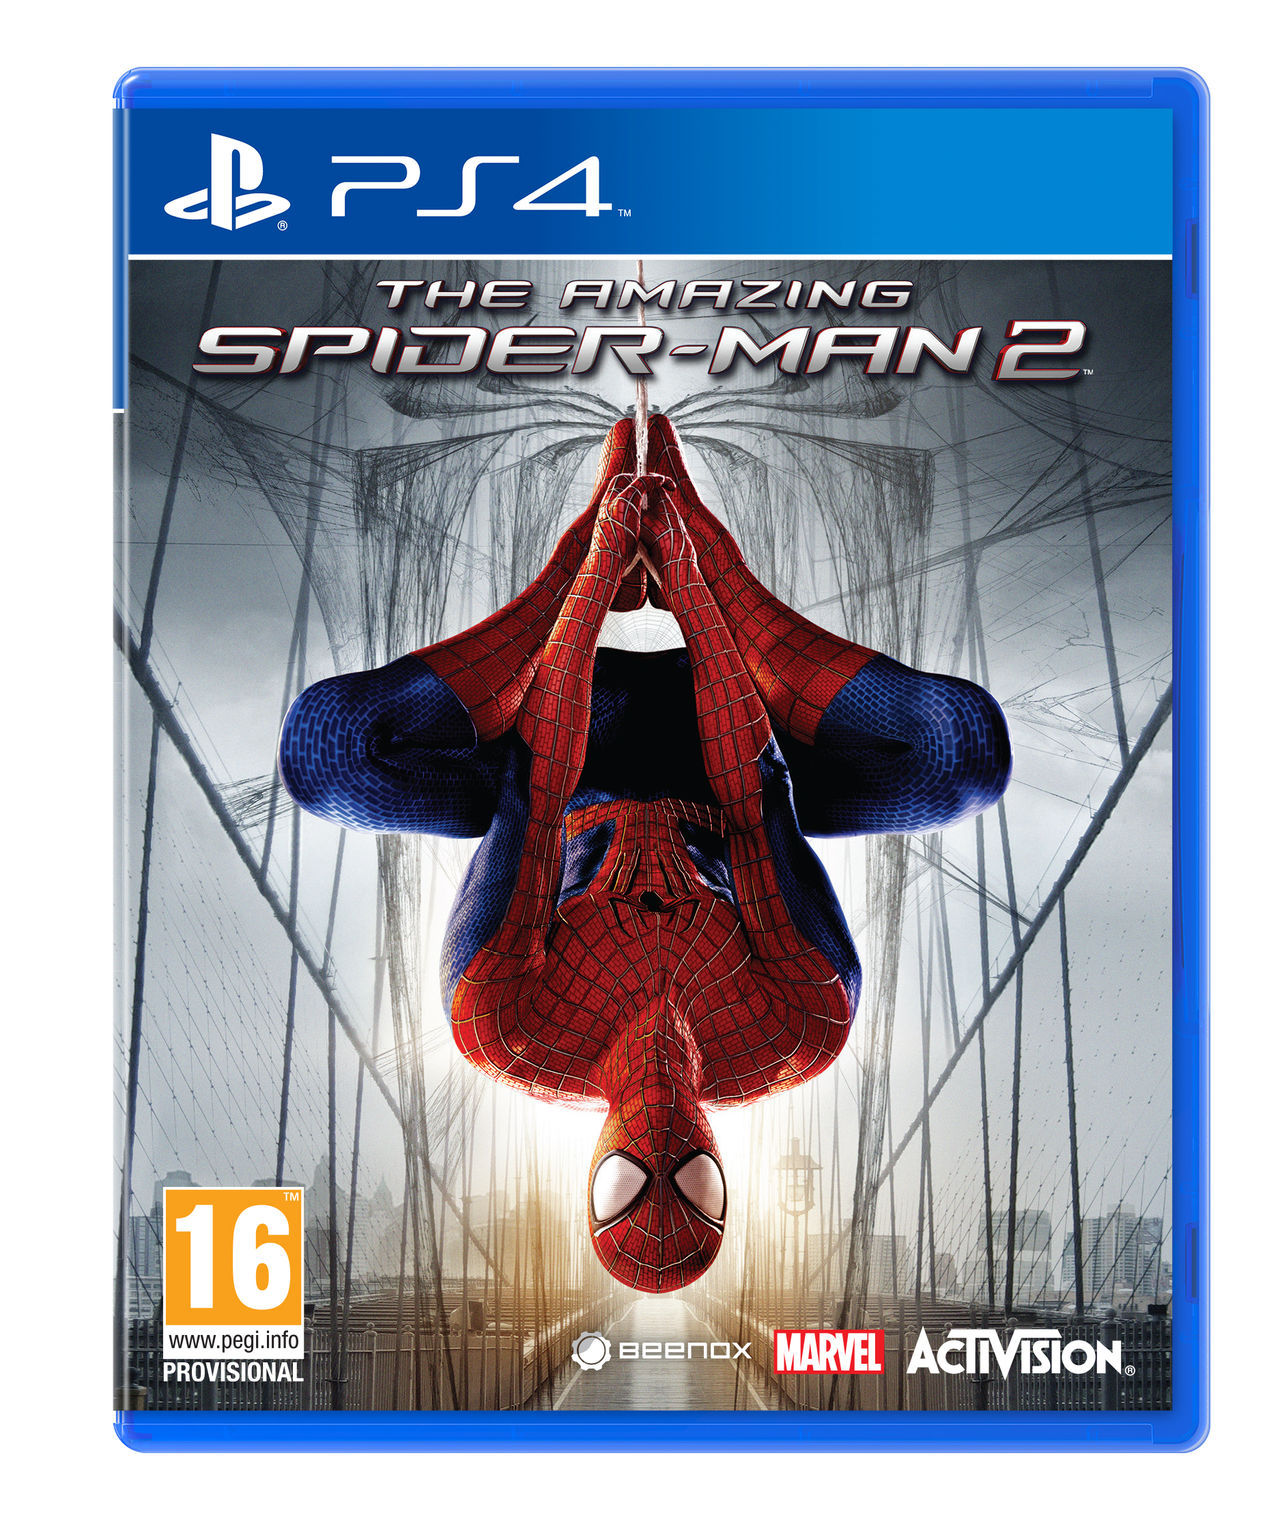 The Amazing Spider-Man 2 - Videojuego (PS4, PC, Xbox 360, PS3, Xbox One,  Wii U y Nintendo 3DS) - Vandal